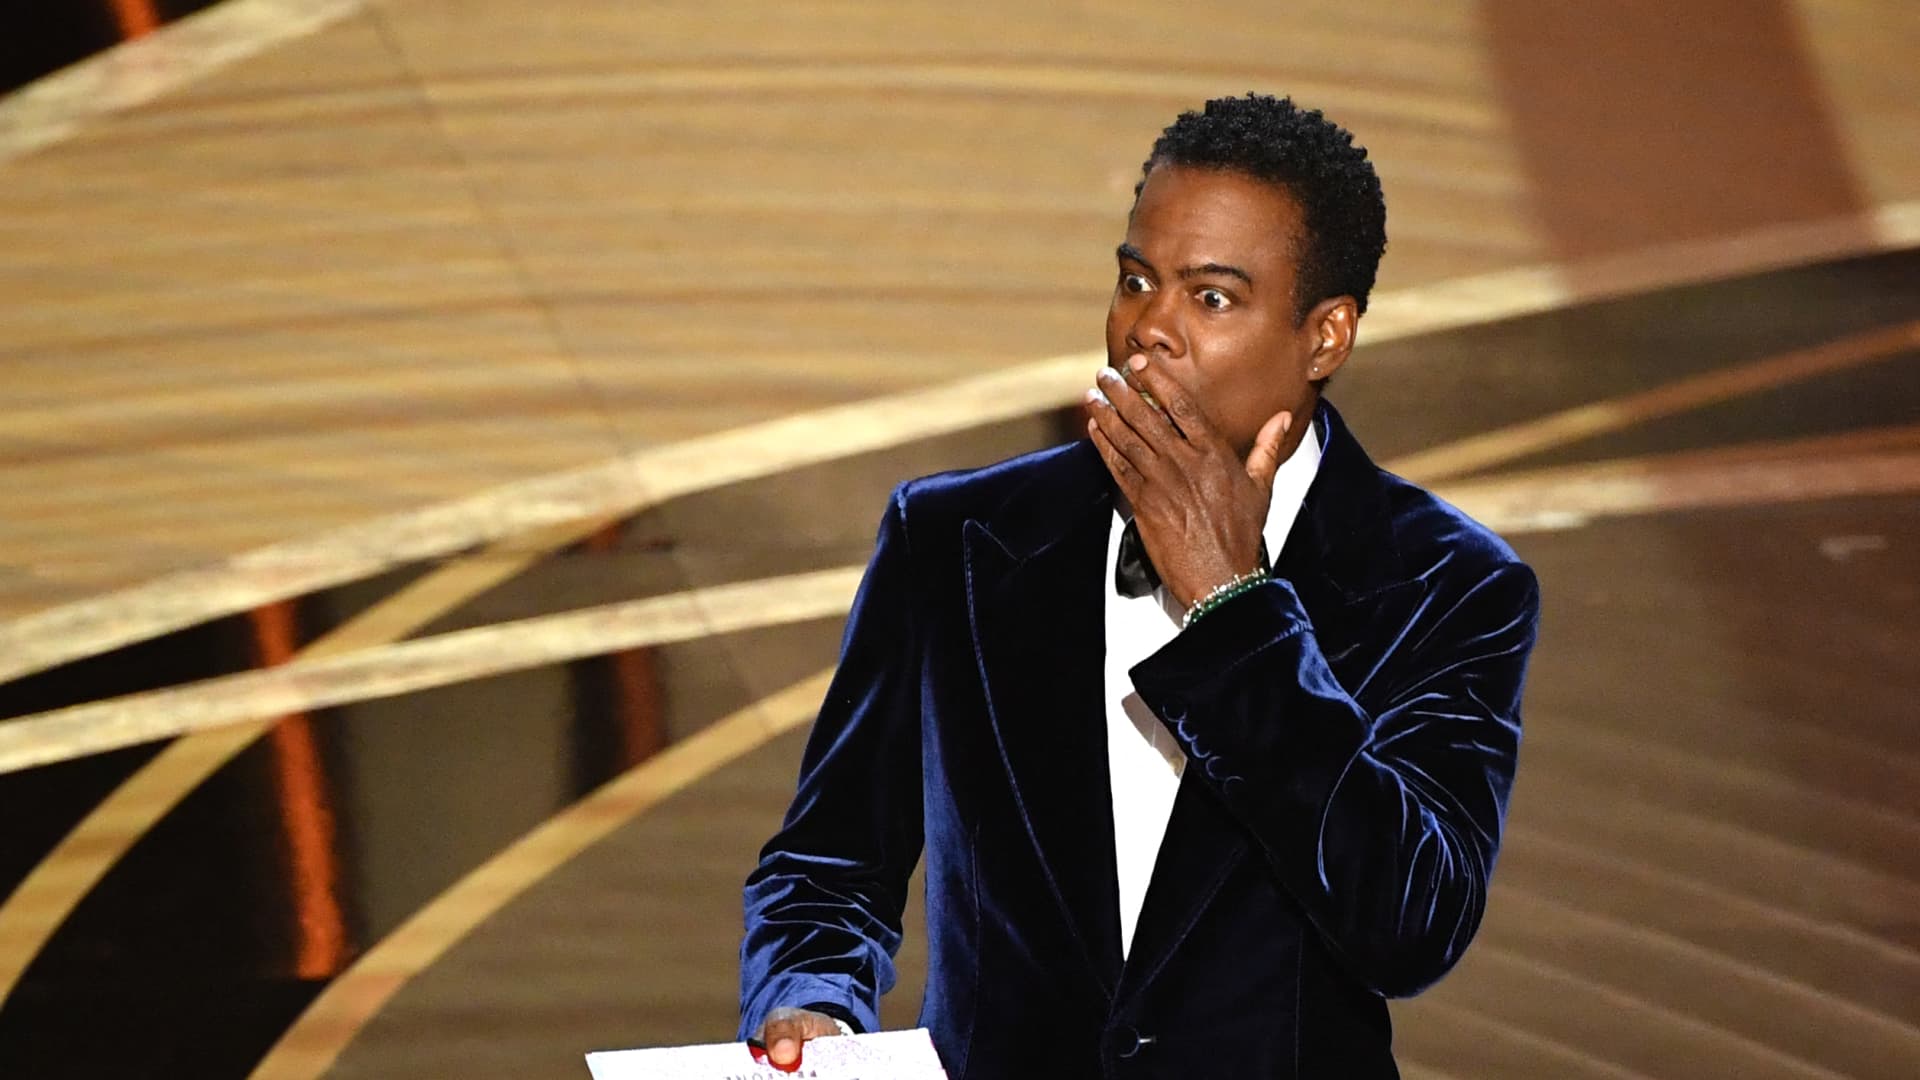 Chris Rock’s first show since Will Smith slap sees ticket prices soar